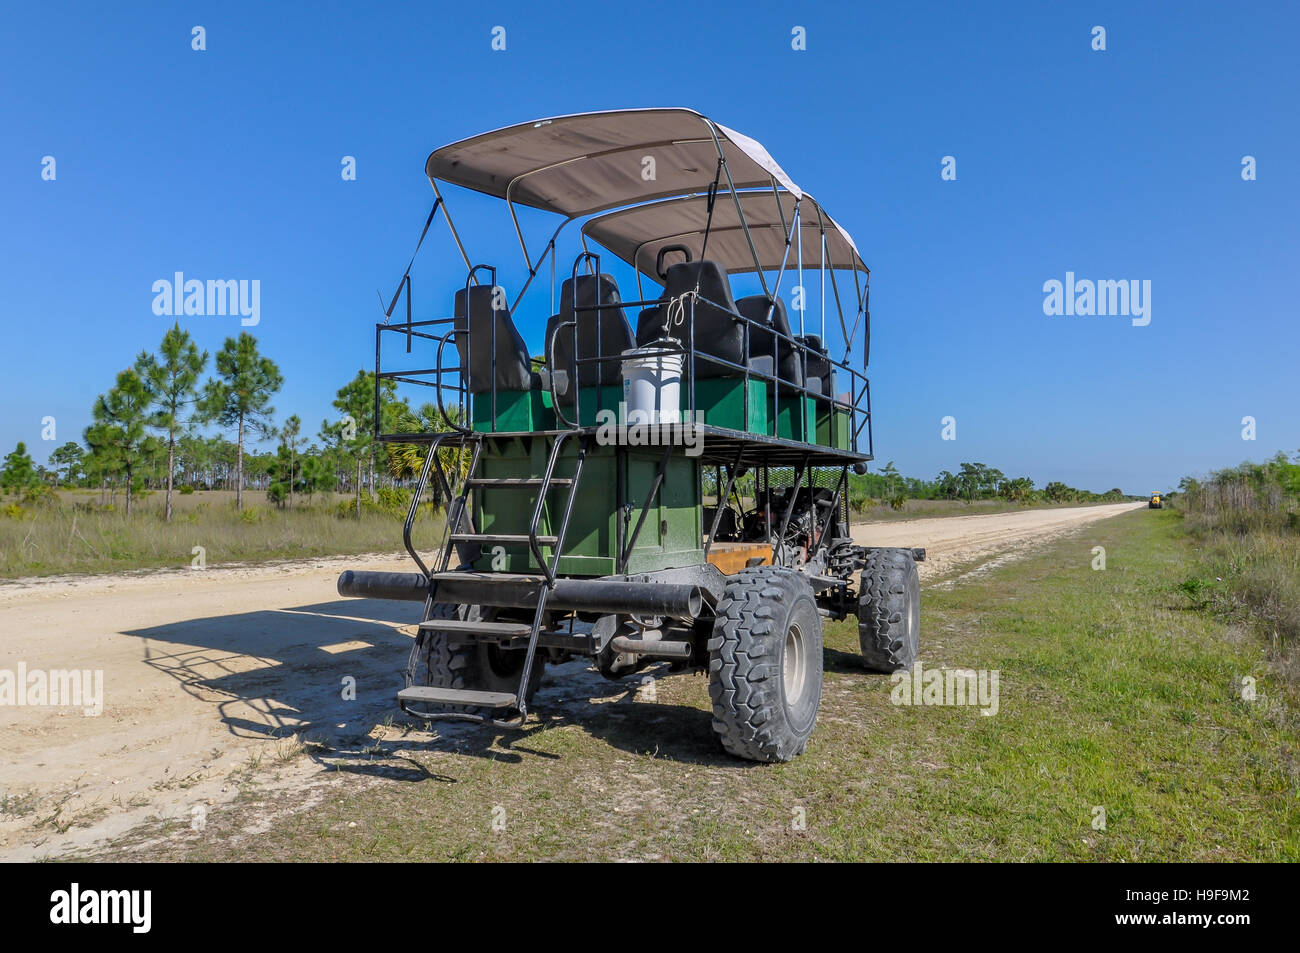 Swamp buggy for touring Big Cypress National Preserve in Florida, near Everglades National Park. Stock Photo